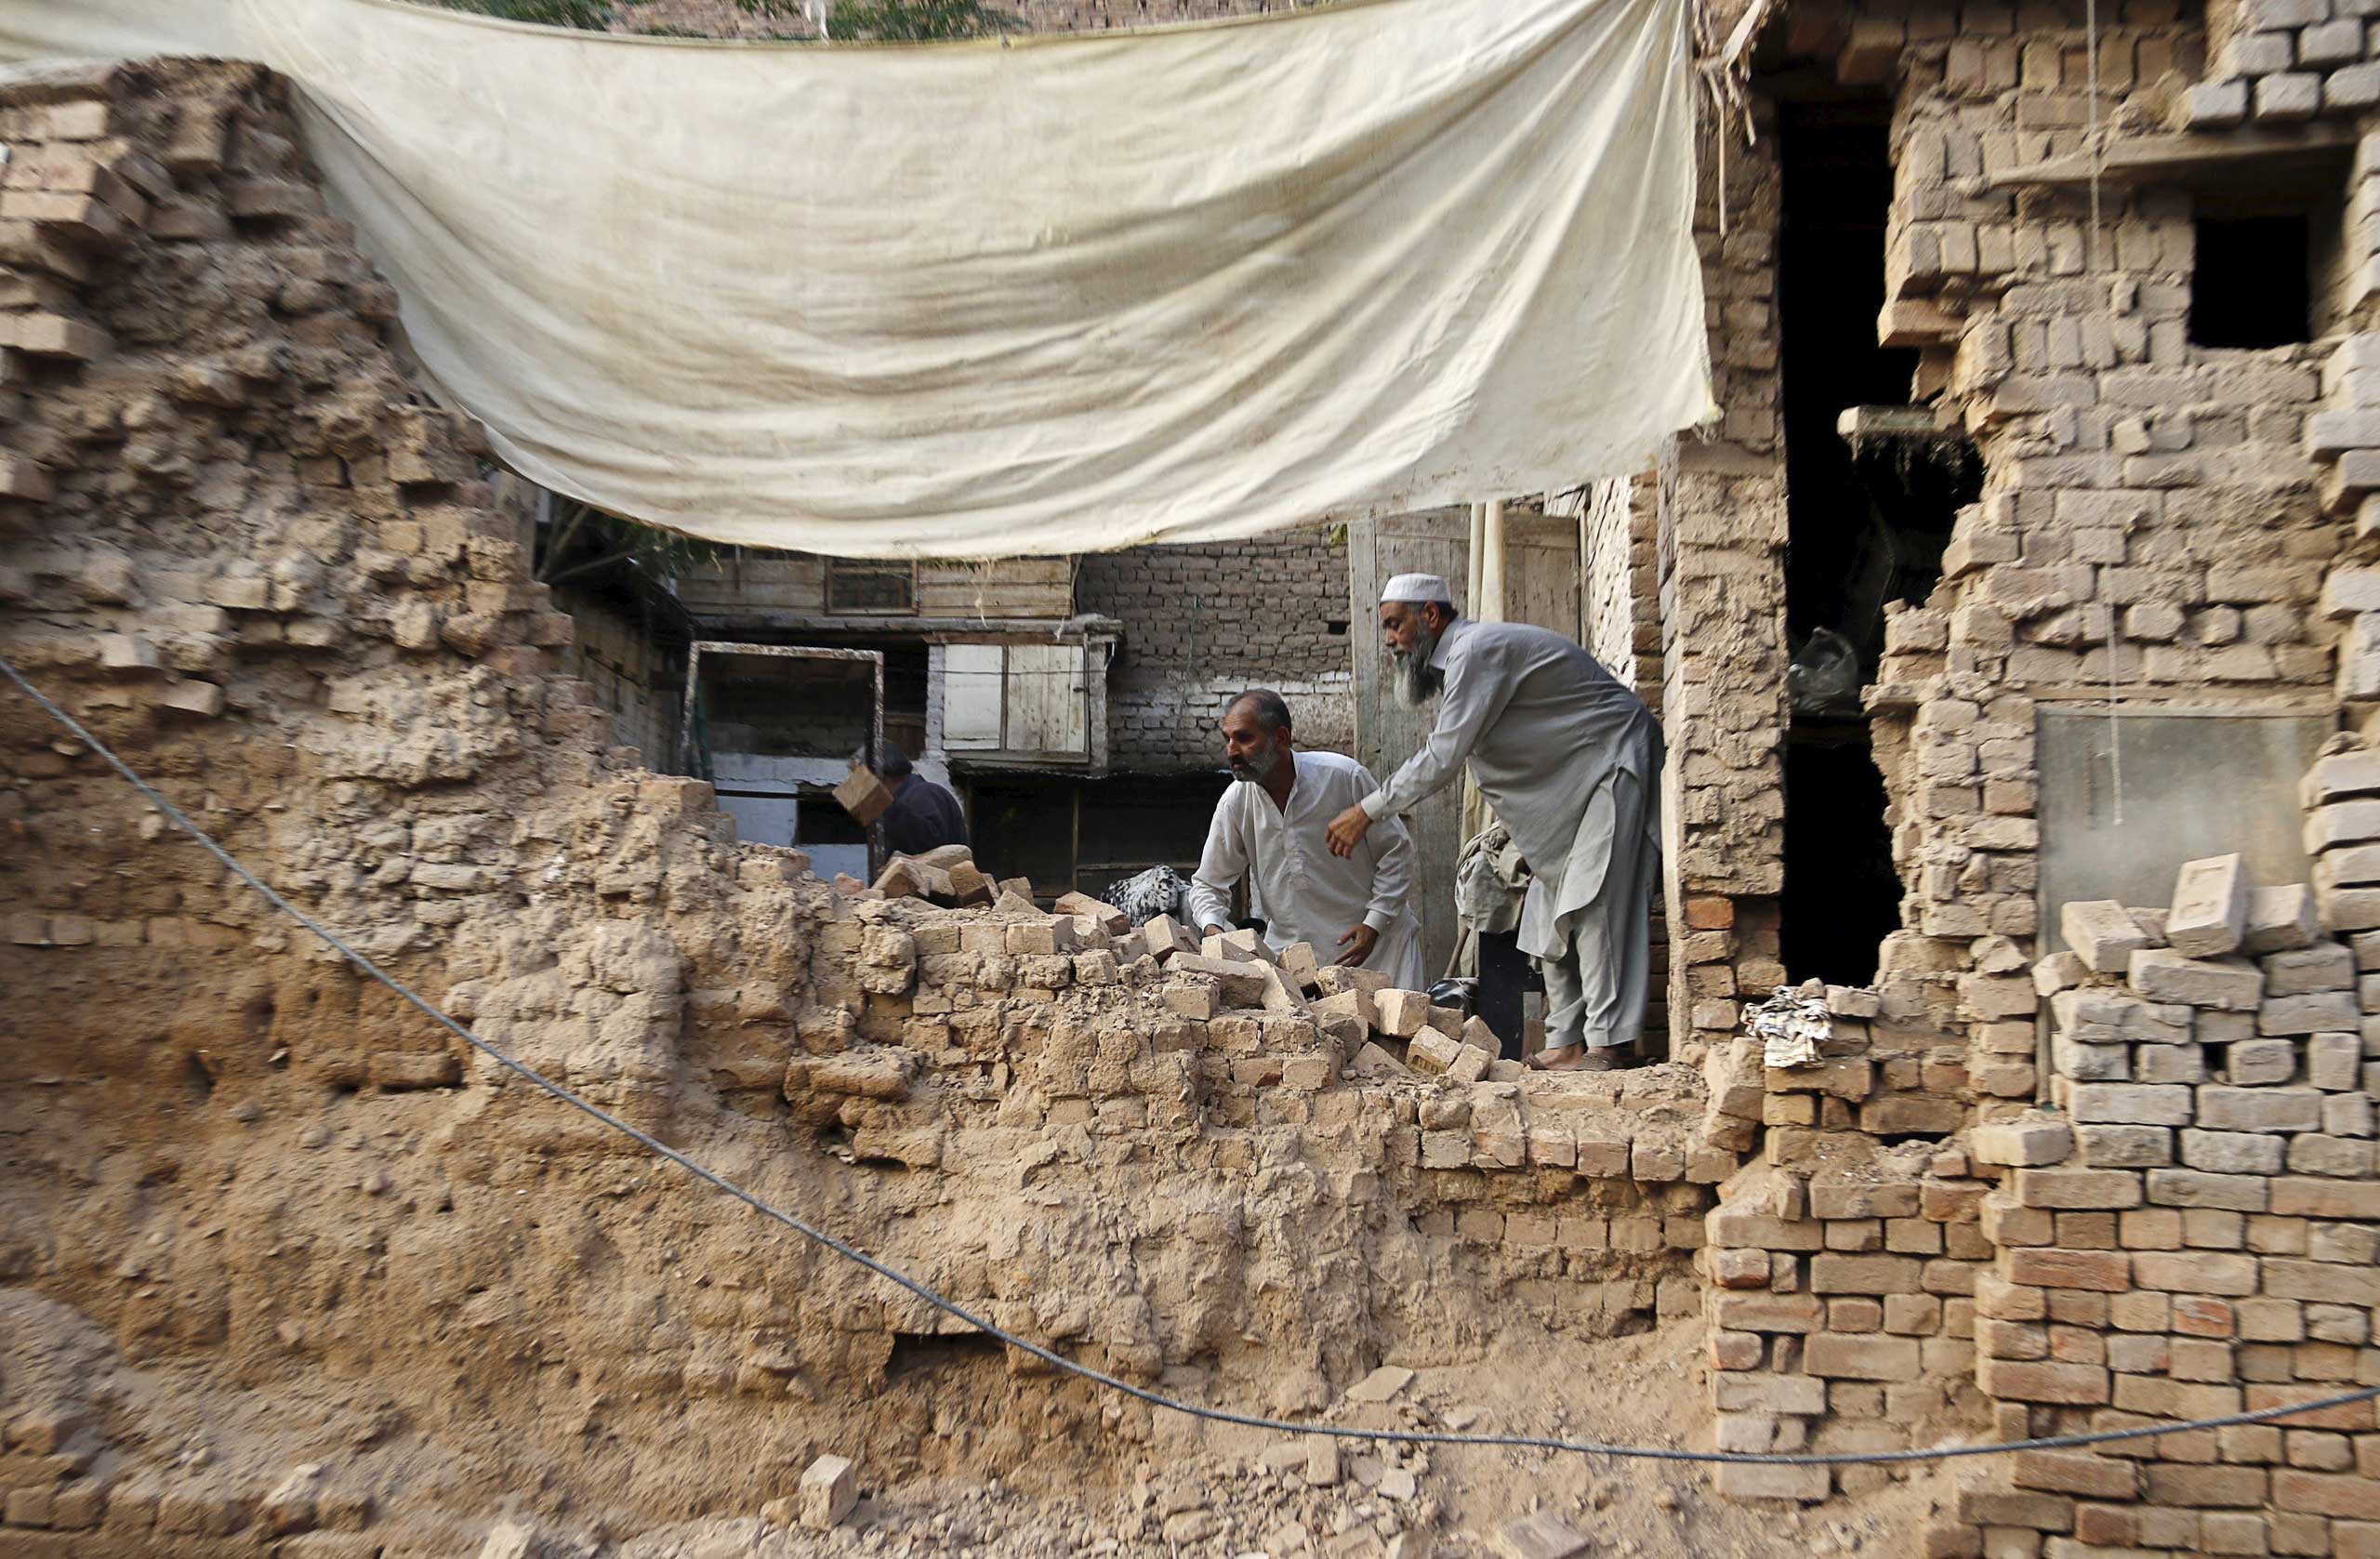 Residents clear the rubble of a house after it was damaged by an earthquake in Peshawar, Pakistan, on Oct. 26, 2015.